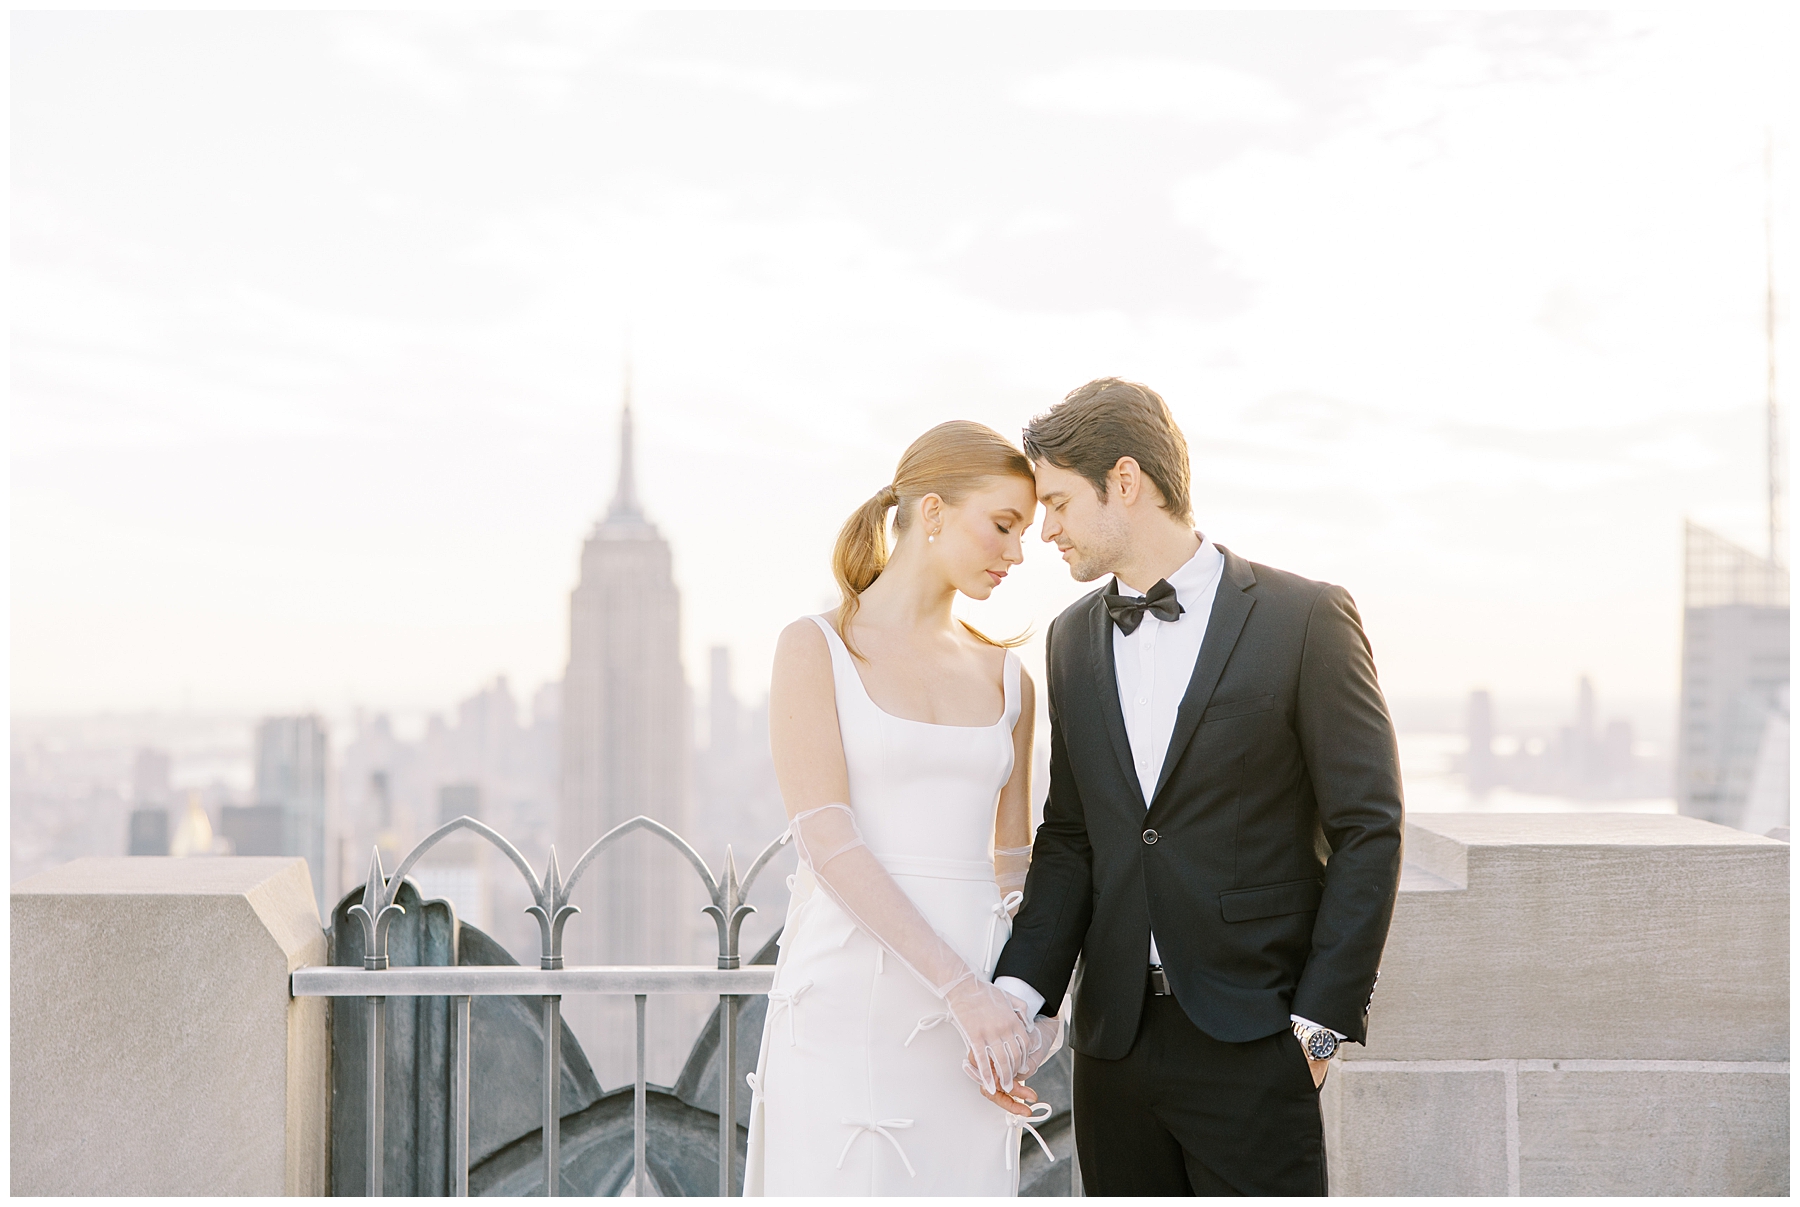 timeless wedding portraits at Top of the Rock